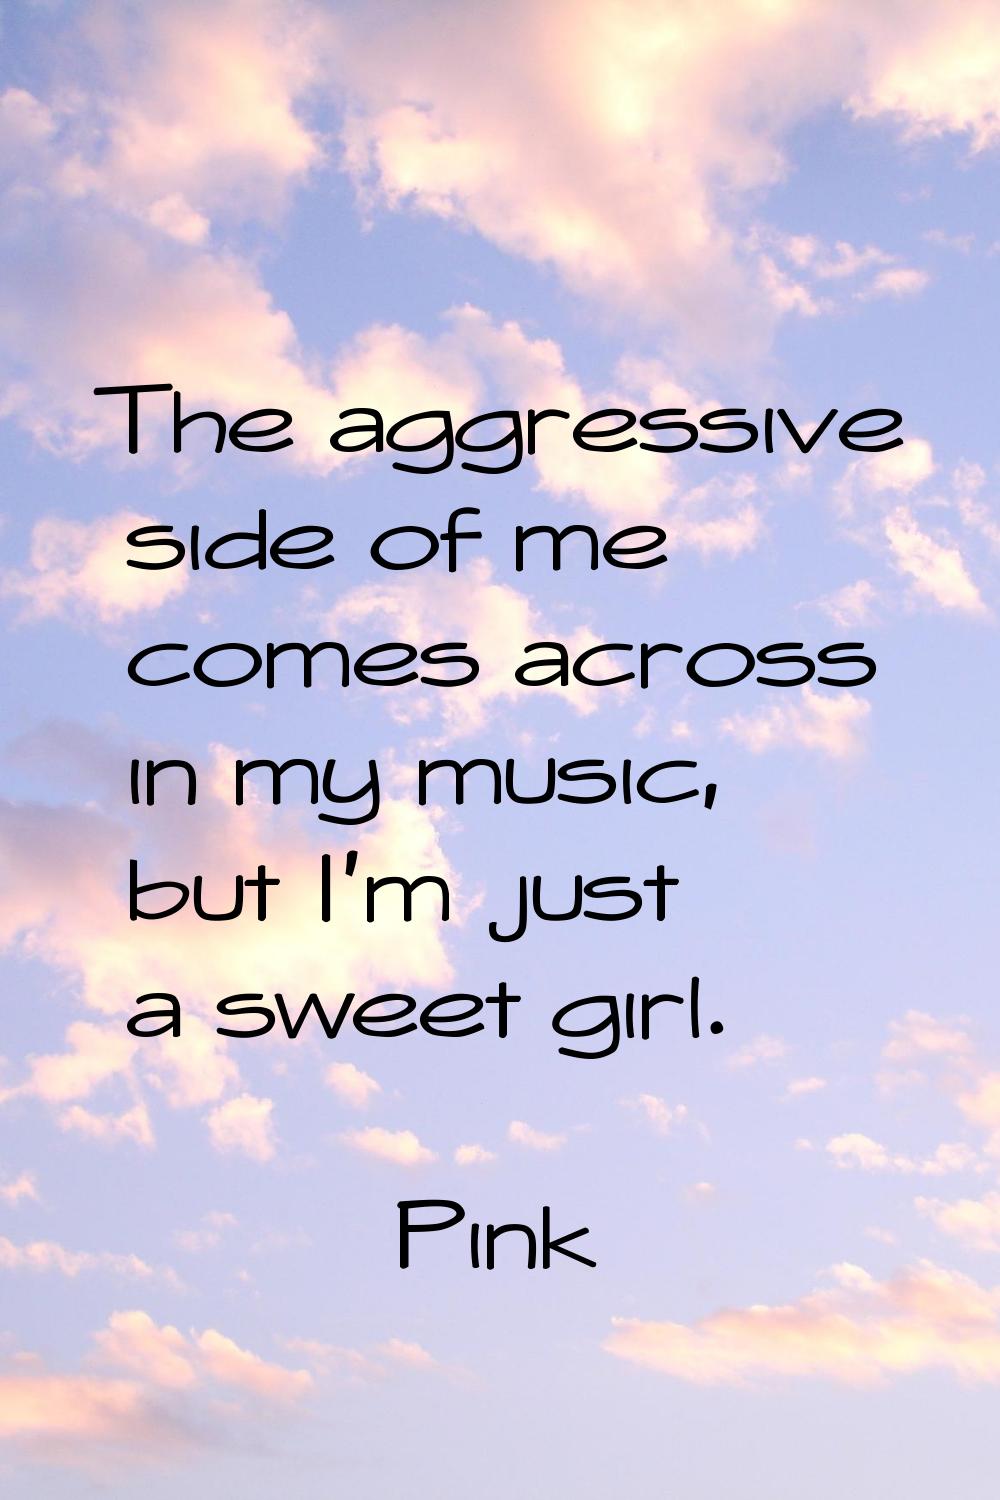 The aggressive side of me comes across in my music, but I'm just a sweet girl.